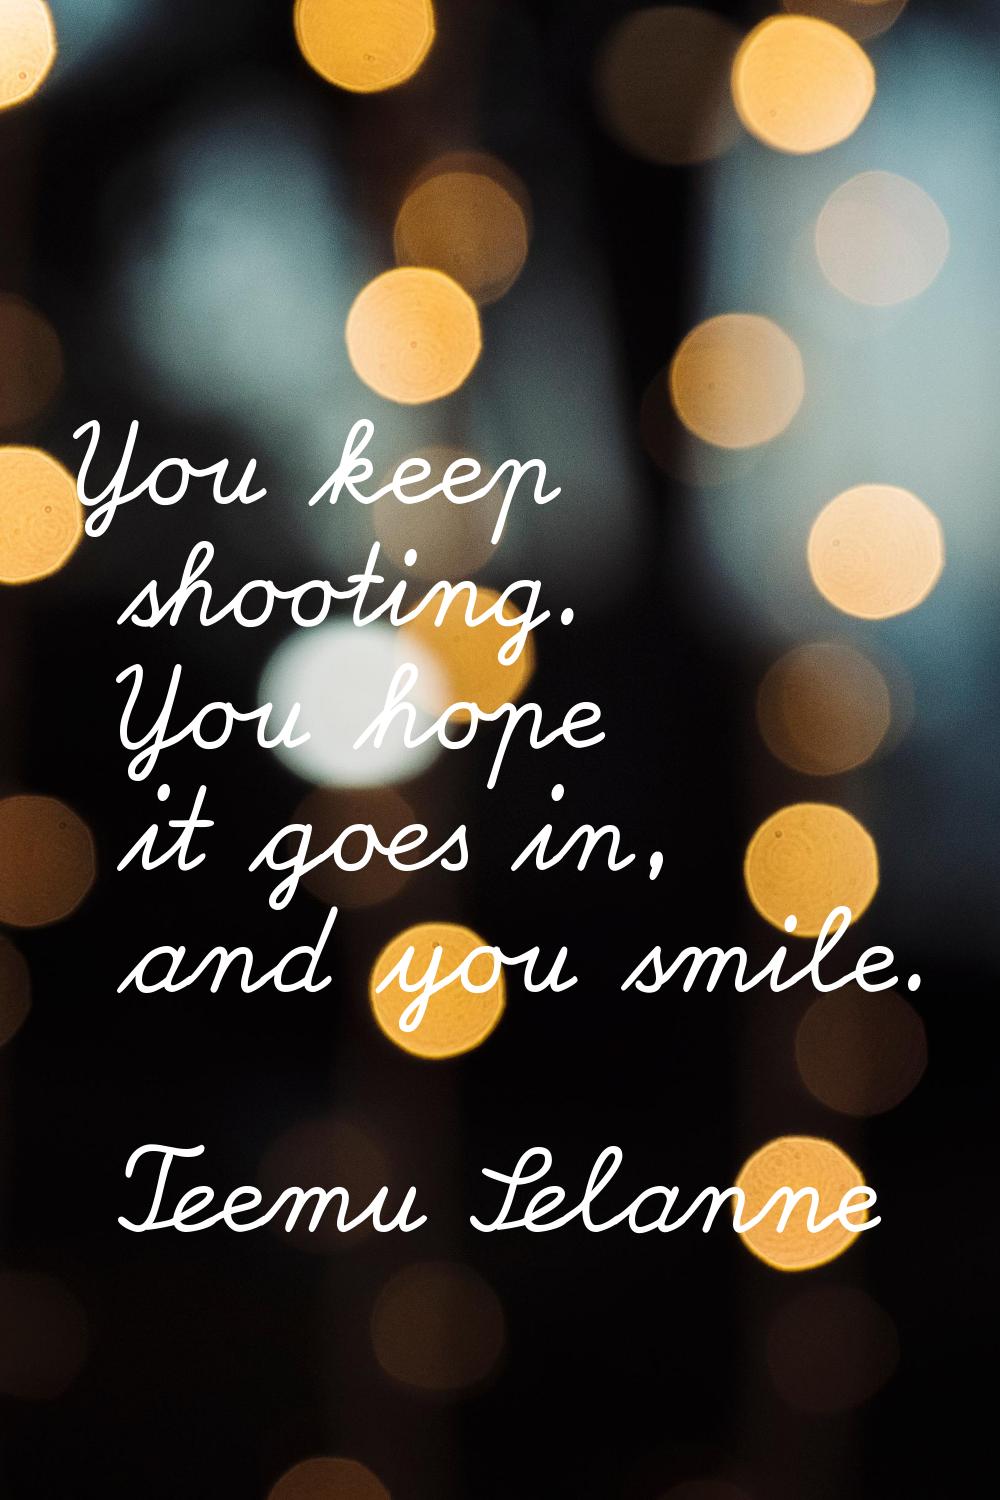 You keep shooting. You hope it goes in, and you smile.